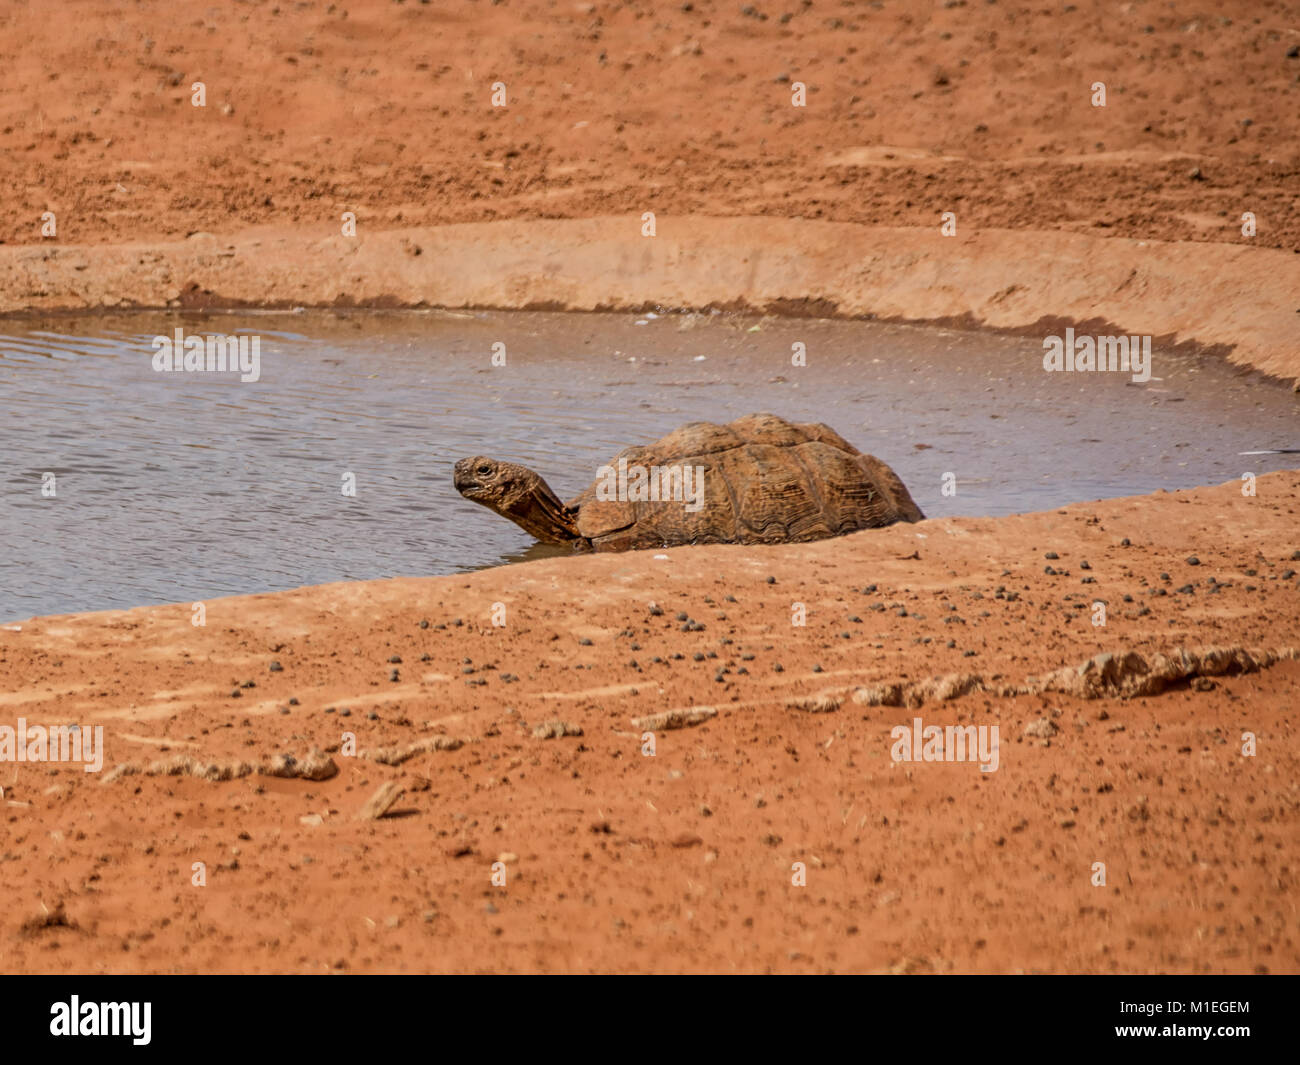 A leopard Tortoise getting a drink at a watering hole in Southern African savanna Stock Photo